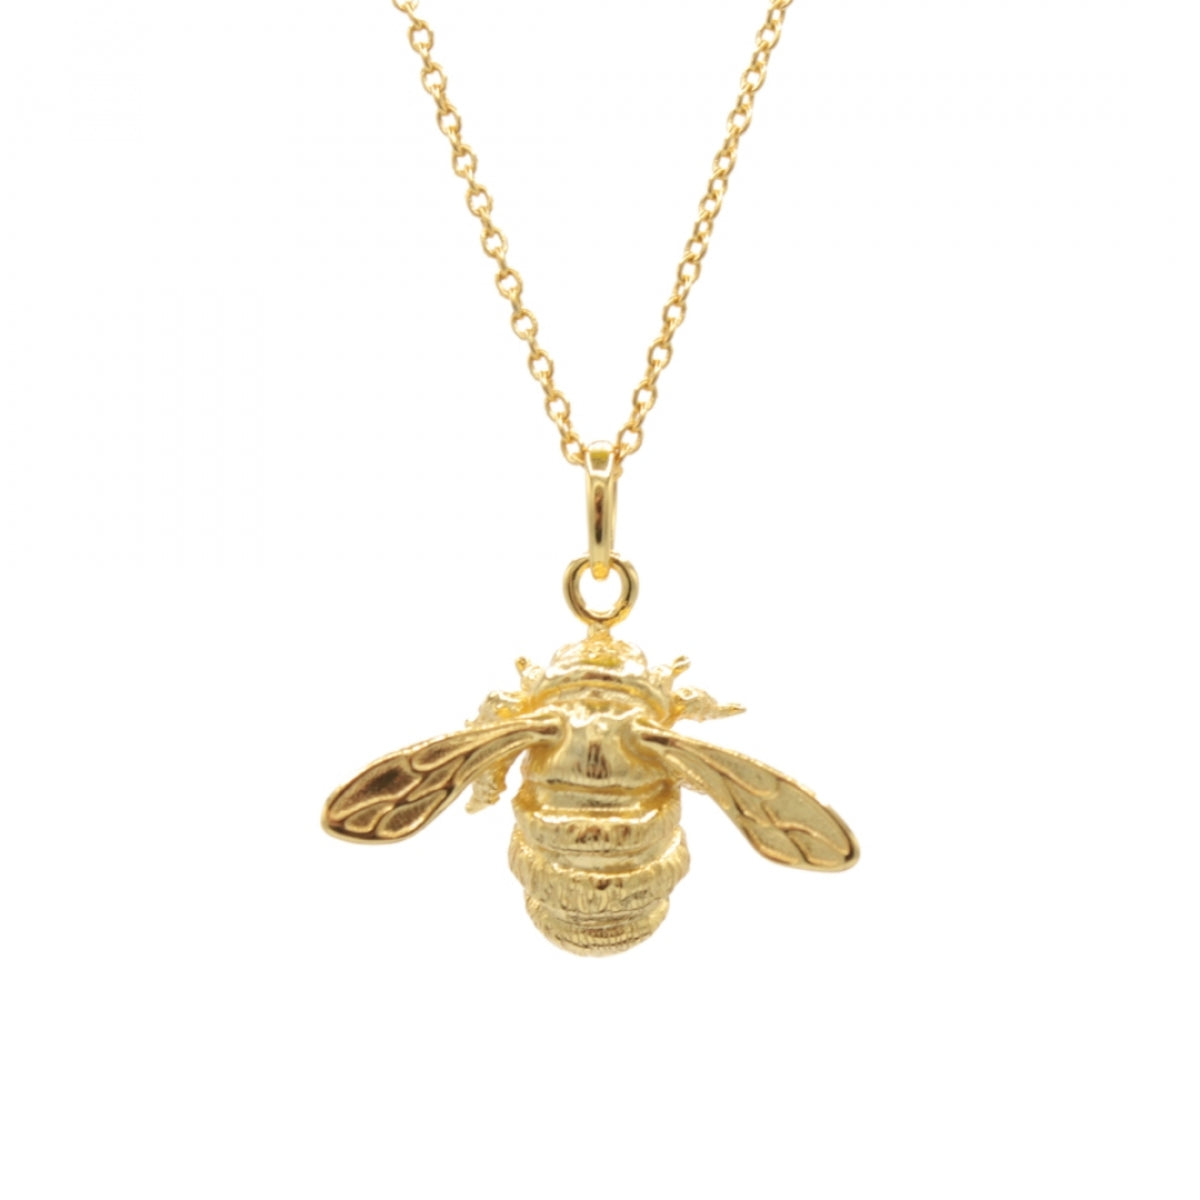 Bumble Bee Pendant - 925 Silver, Gold